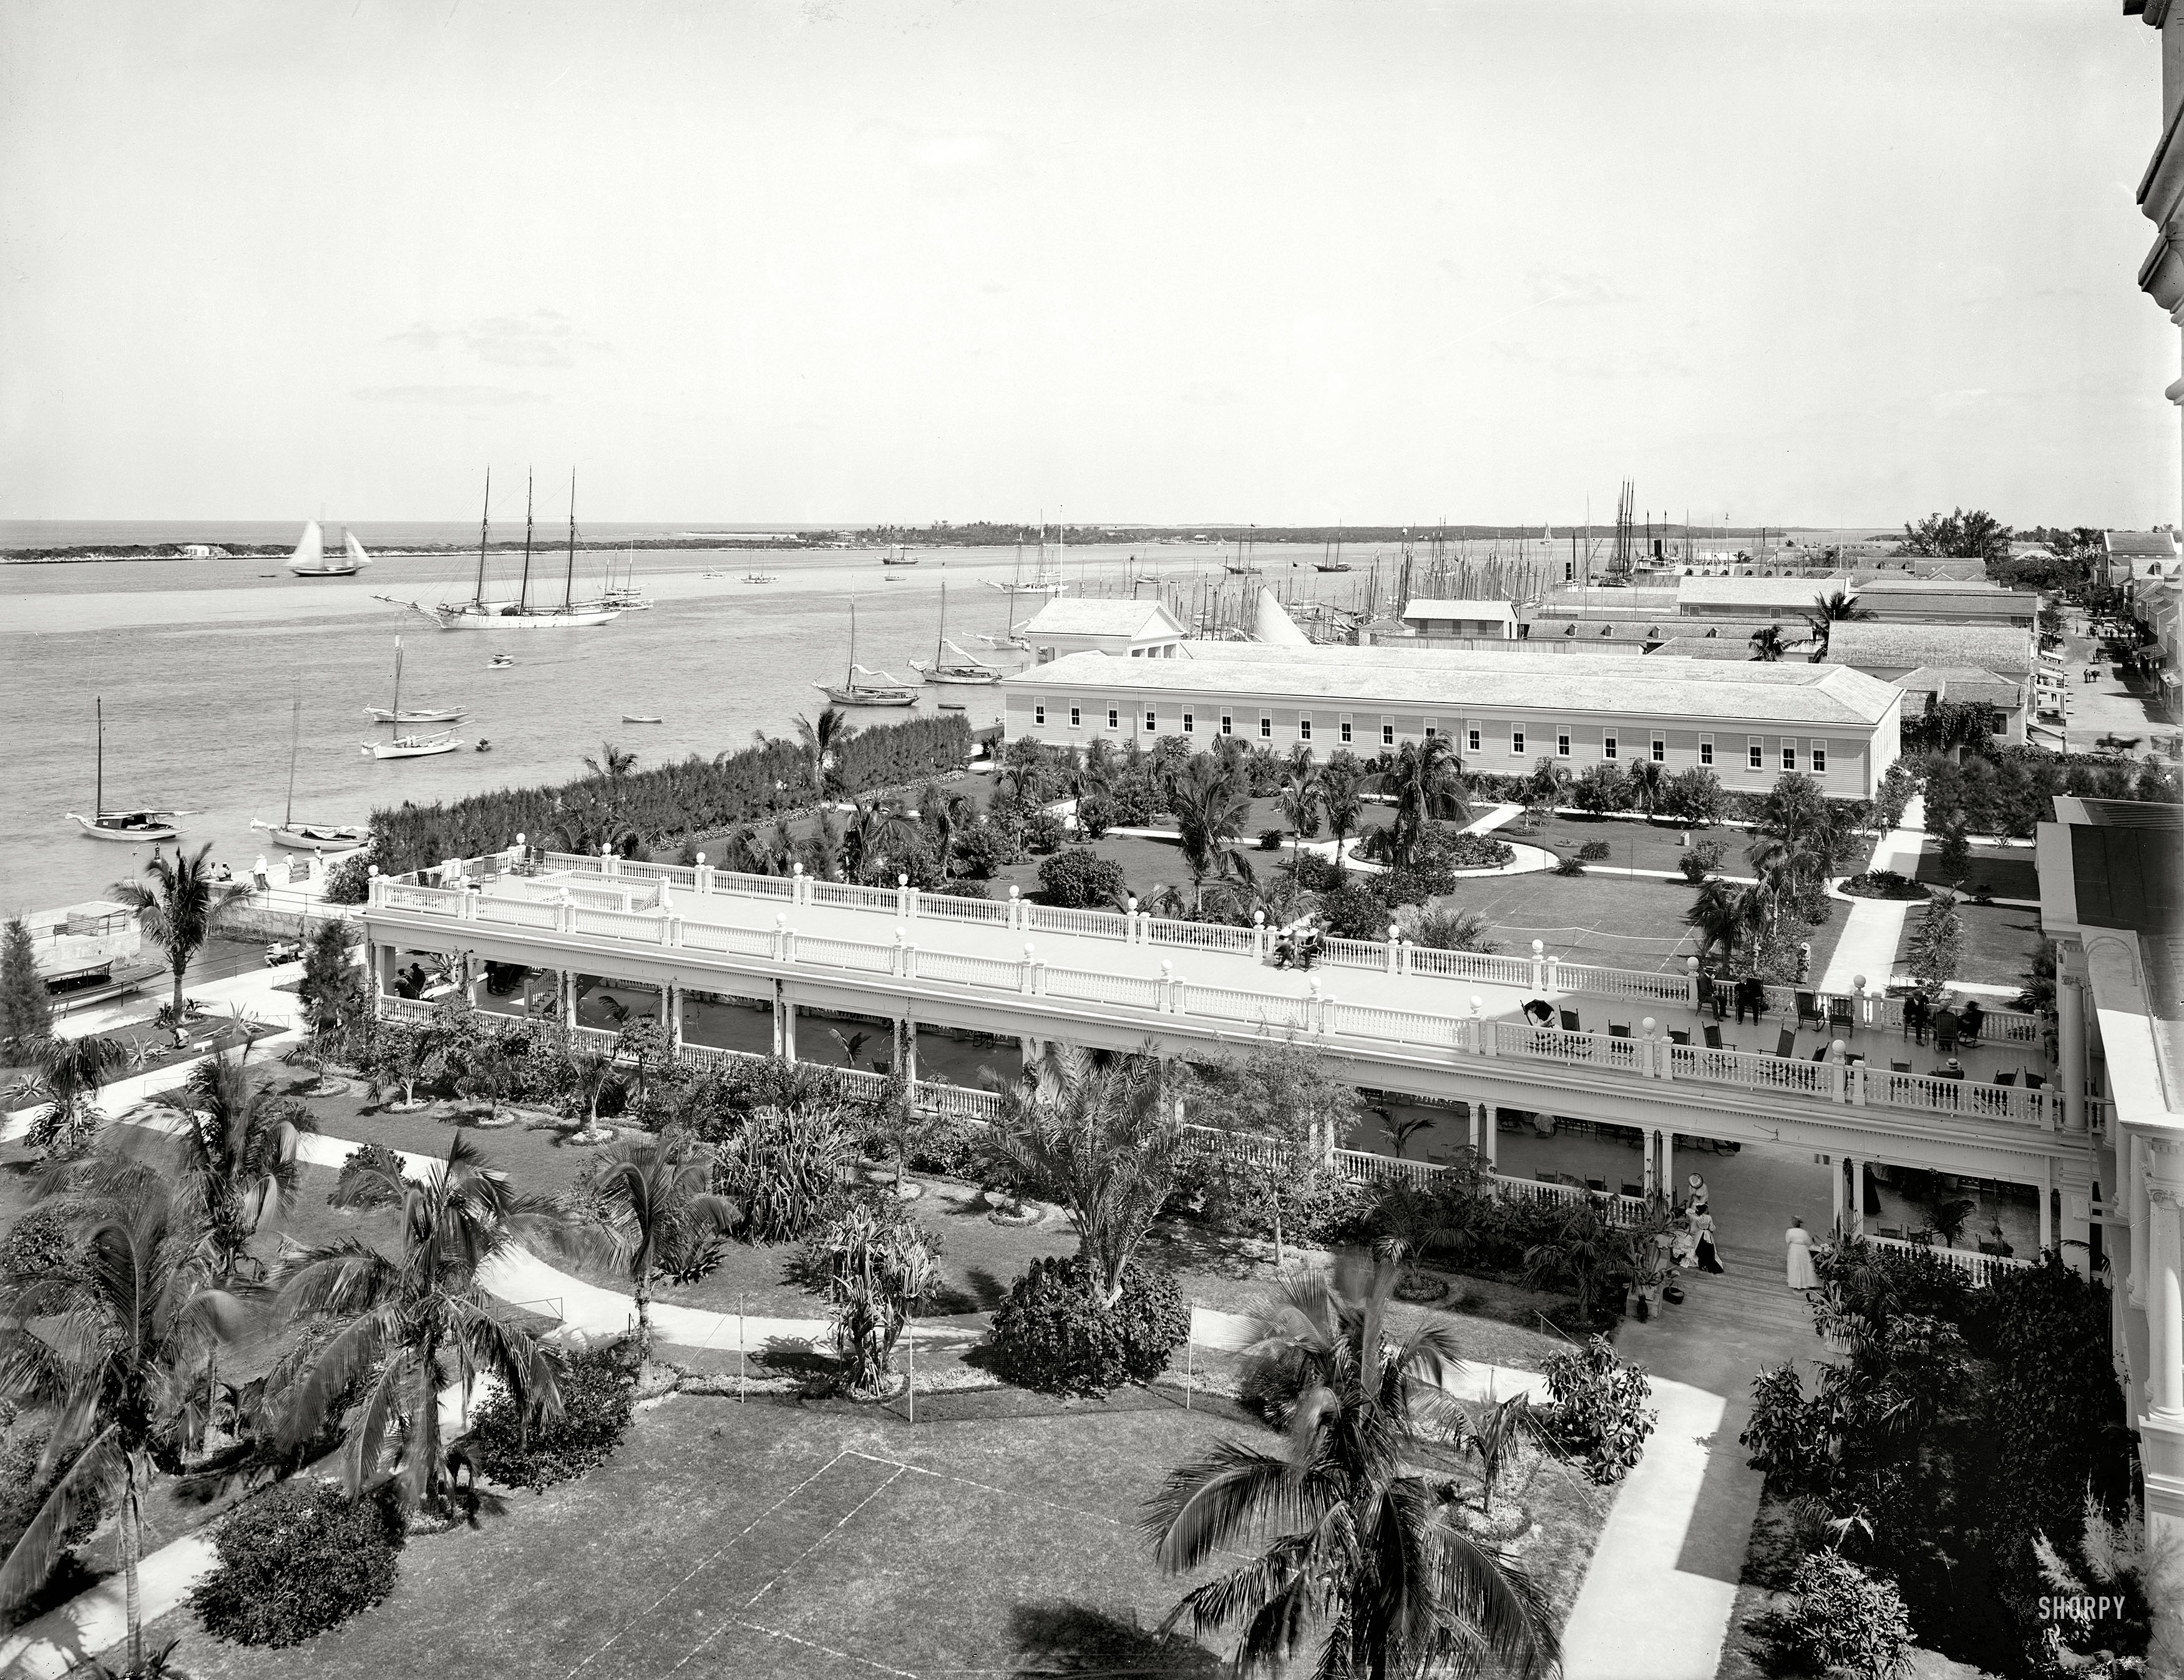 Circa 1904. "Gardens of Colonial Hotel and the harbor, Nassau, Bahama Islands." 8x10 inch dry plate glass negative, Detroit Publishing Company. View full size.